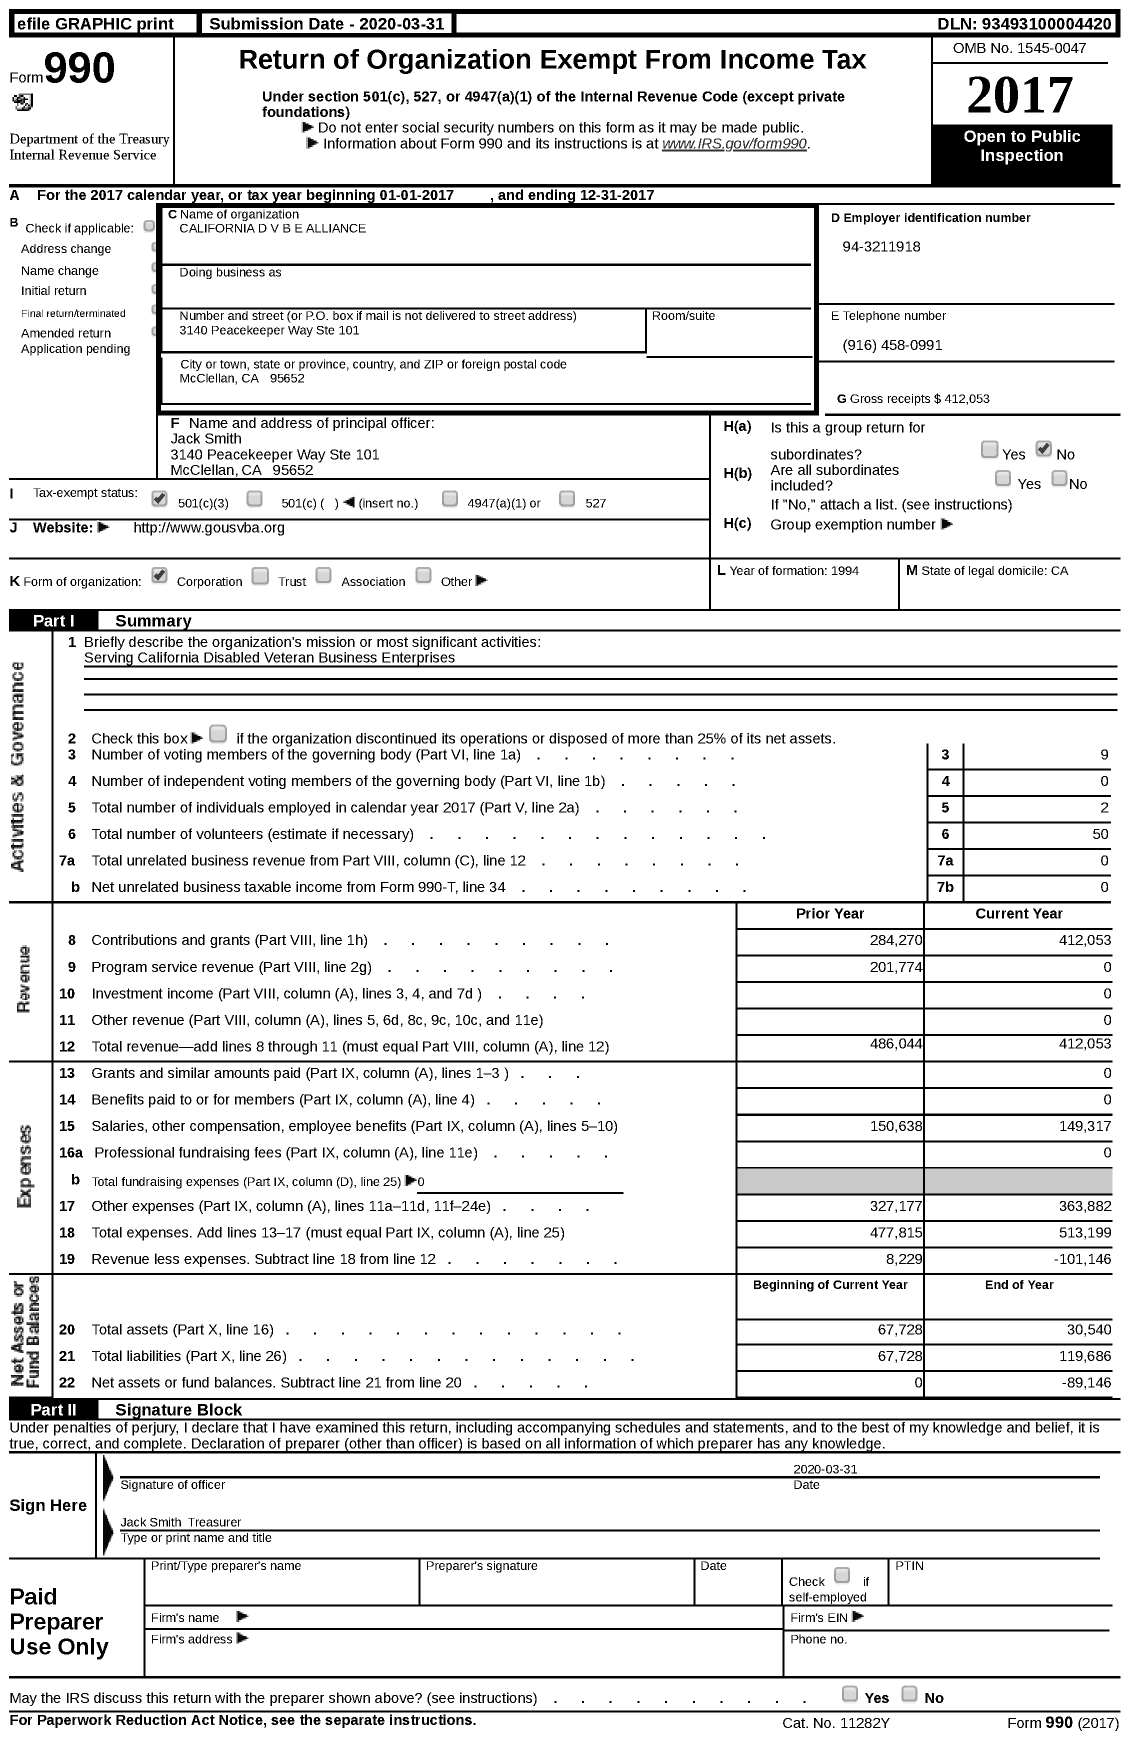 Image of first page of 2017 Form 990 for California DVBE Alliance US Veteran Business Alliance